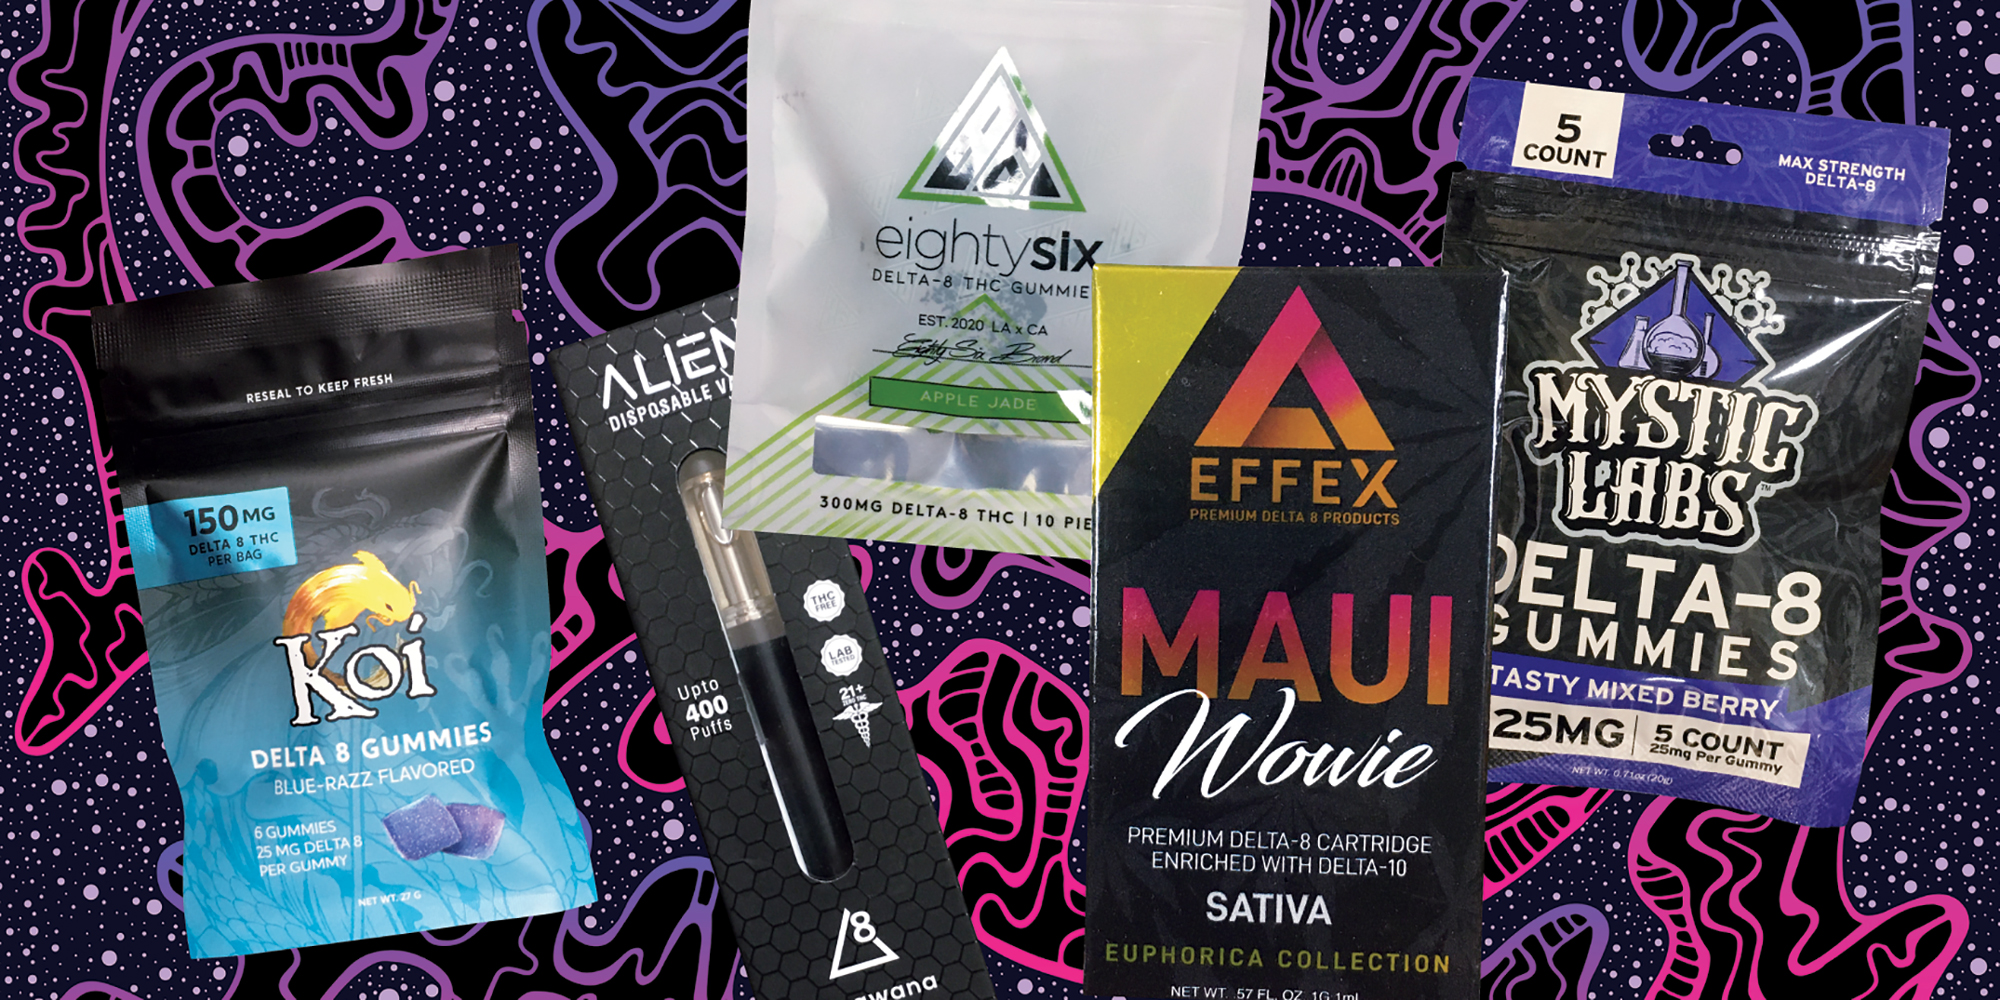 ATLRX DELTA 8 GUMMIES - Gummies|Thc|Products|Hemp|Product|Brand|Effects|Delta|Gummy|Cbd|Origin|Quality|Dosage|Delta-8|Dose|Usasource|Flavors|Brands|Ingredients|Range|Customers|Edibles|Cartridges|Reviews|Side|List|Health|Cannabis|Lab|Customer|Options|Benefits|Overviewproducts|Research|Time|Market|Drug|Farms|Party|People|Delta-8 Thc|Delta-8 Products|Delta-9 Thc|Delta-8 Gummies|Delta-8 Thc Products|Delta-8 Brands|Customer Reviews|Brand Overviewproducts|Drug Tests|Free Shipping|Similar Benefits|Vape Cartridges|Hemp Doctor|United States|Third Party Lab|Drug Test|Thc Edibles|Health Canada|Cannabis Plant|Side Effects|Organic Hemp|Diamond Cbd|Reaction Time|Legal Hemp|Psychoactive Effects|Psychoactive Properties|Third Party|Dry Eyes|Delta-8 Market|Tolerance Level